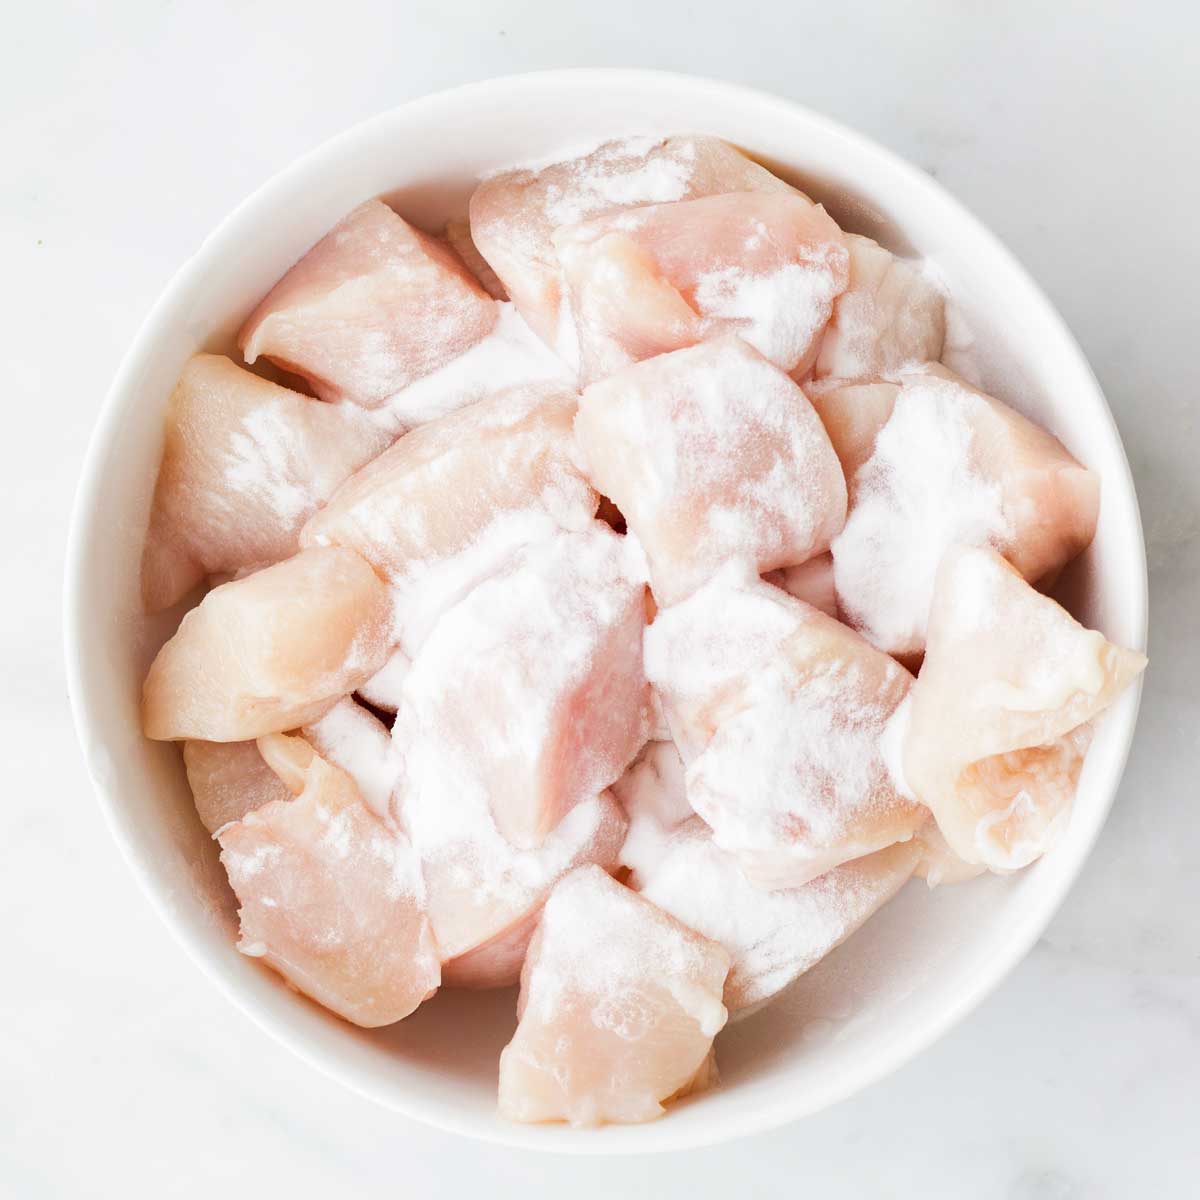 Bowl of Chicken Breast Chunks with Baking Soda Sprinkled On Top.